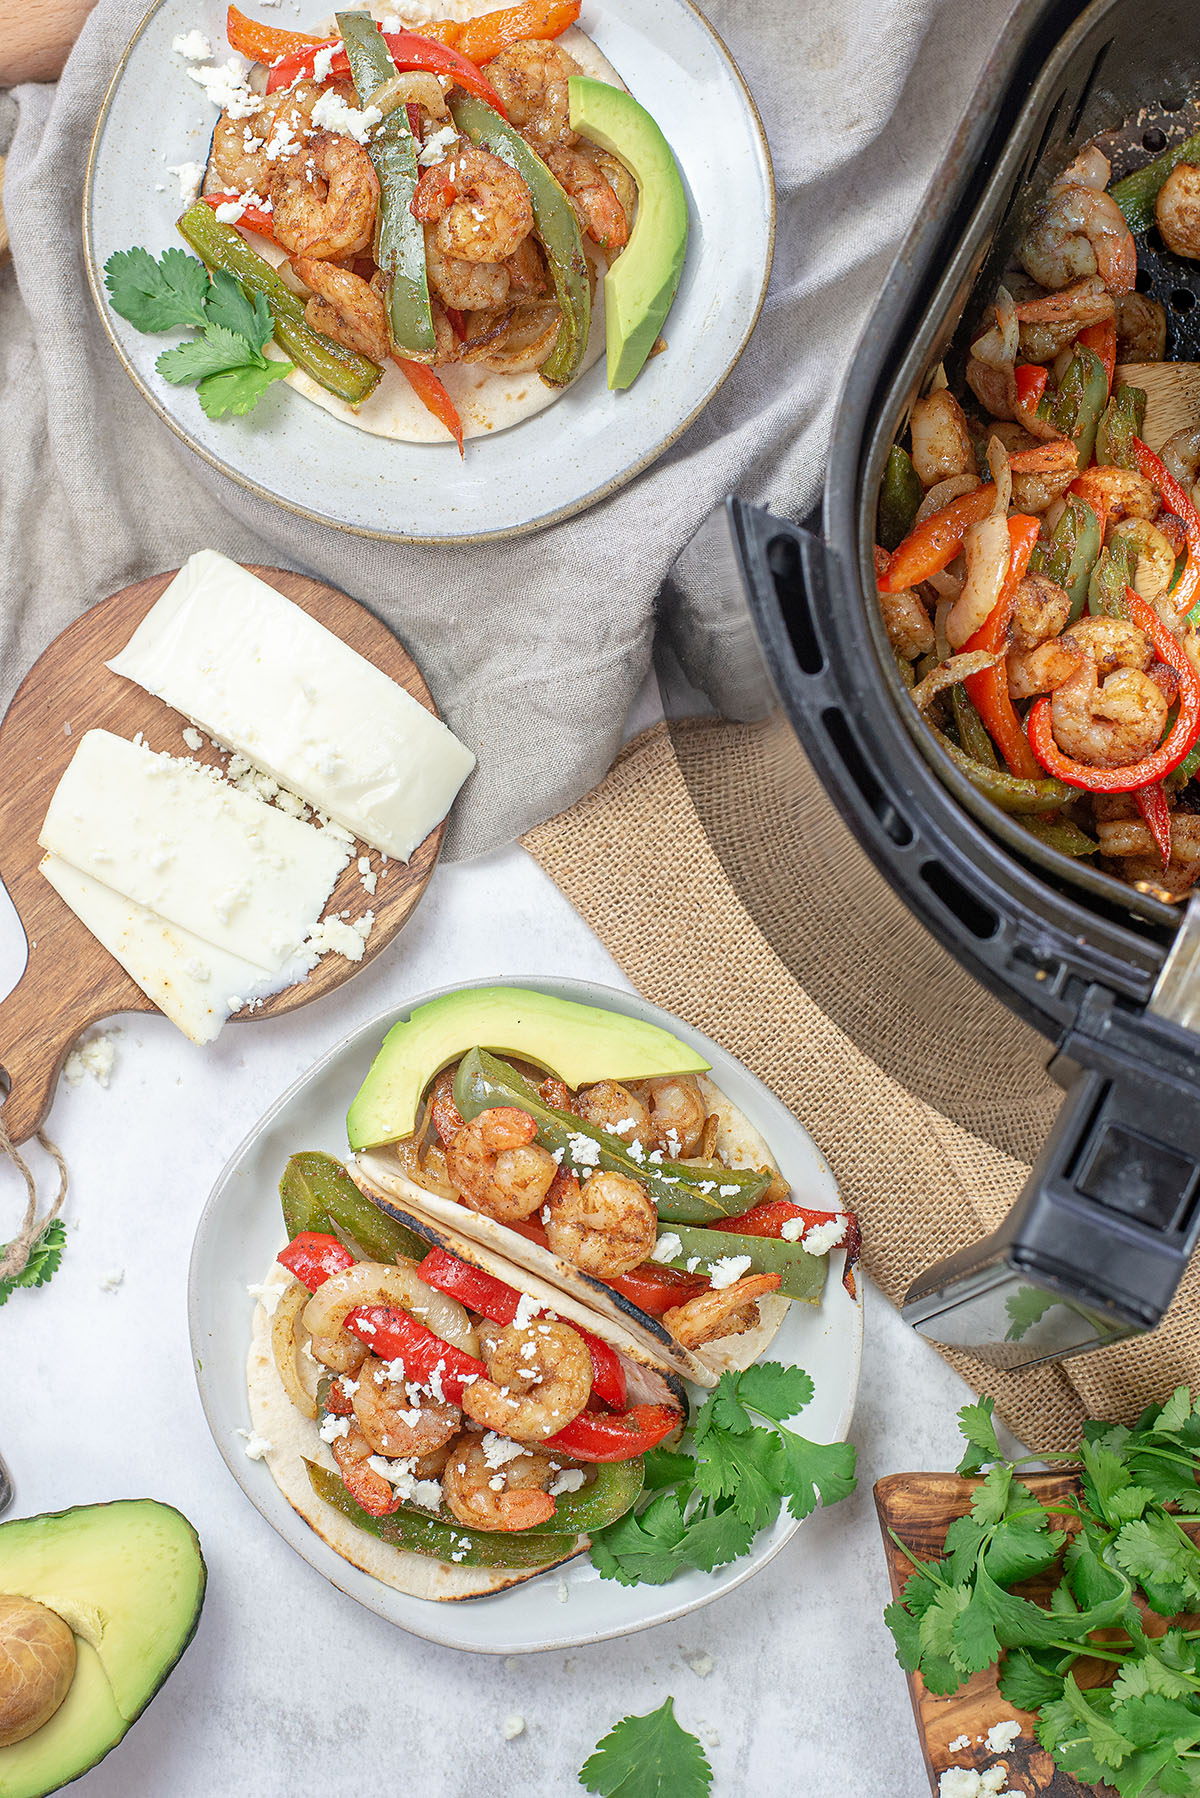 Overhead view of plates of fajitas next to an air fryer.